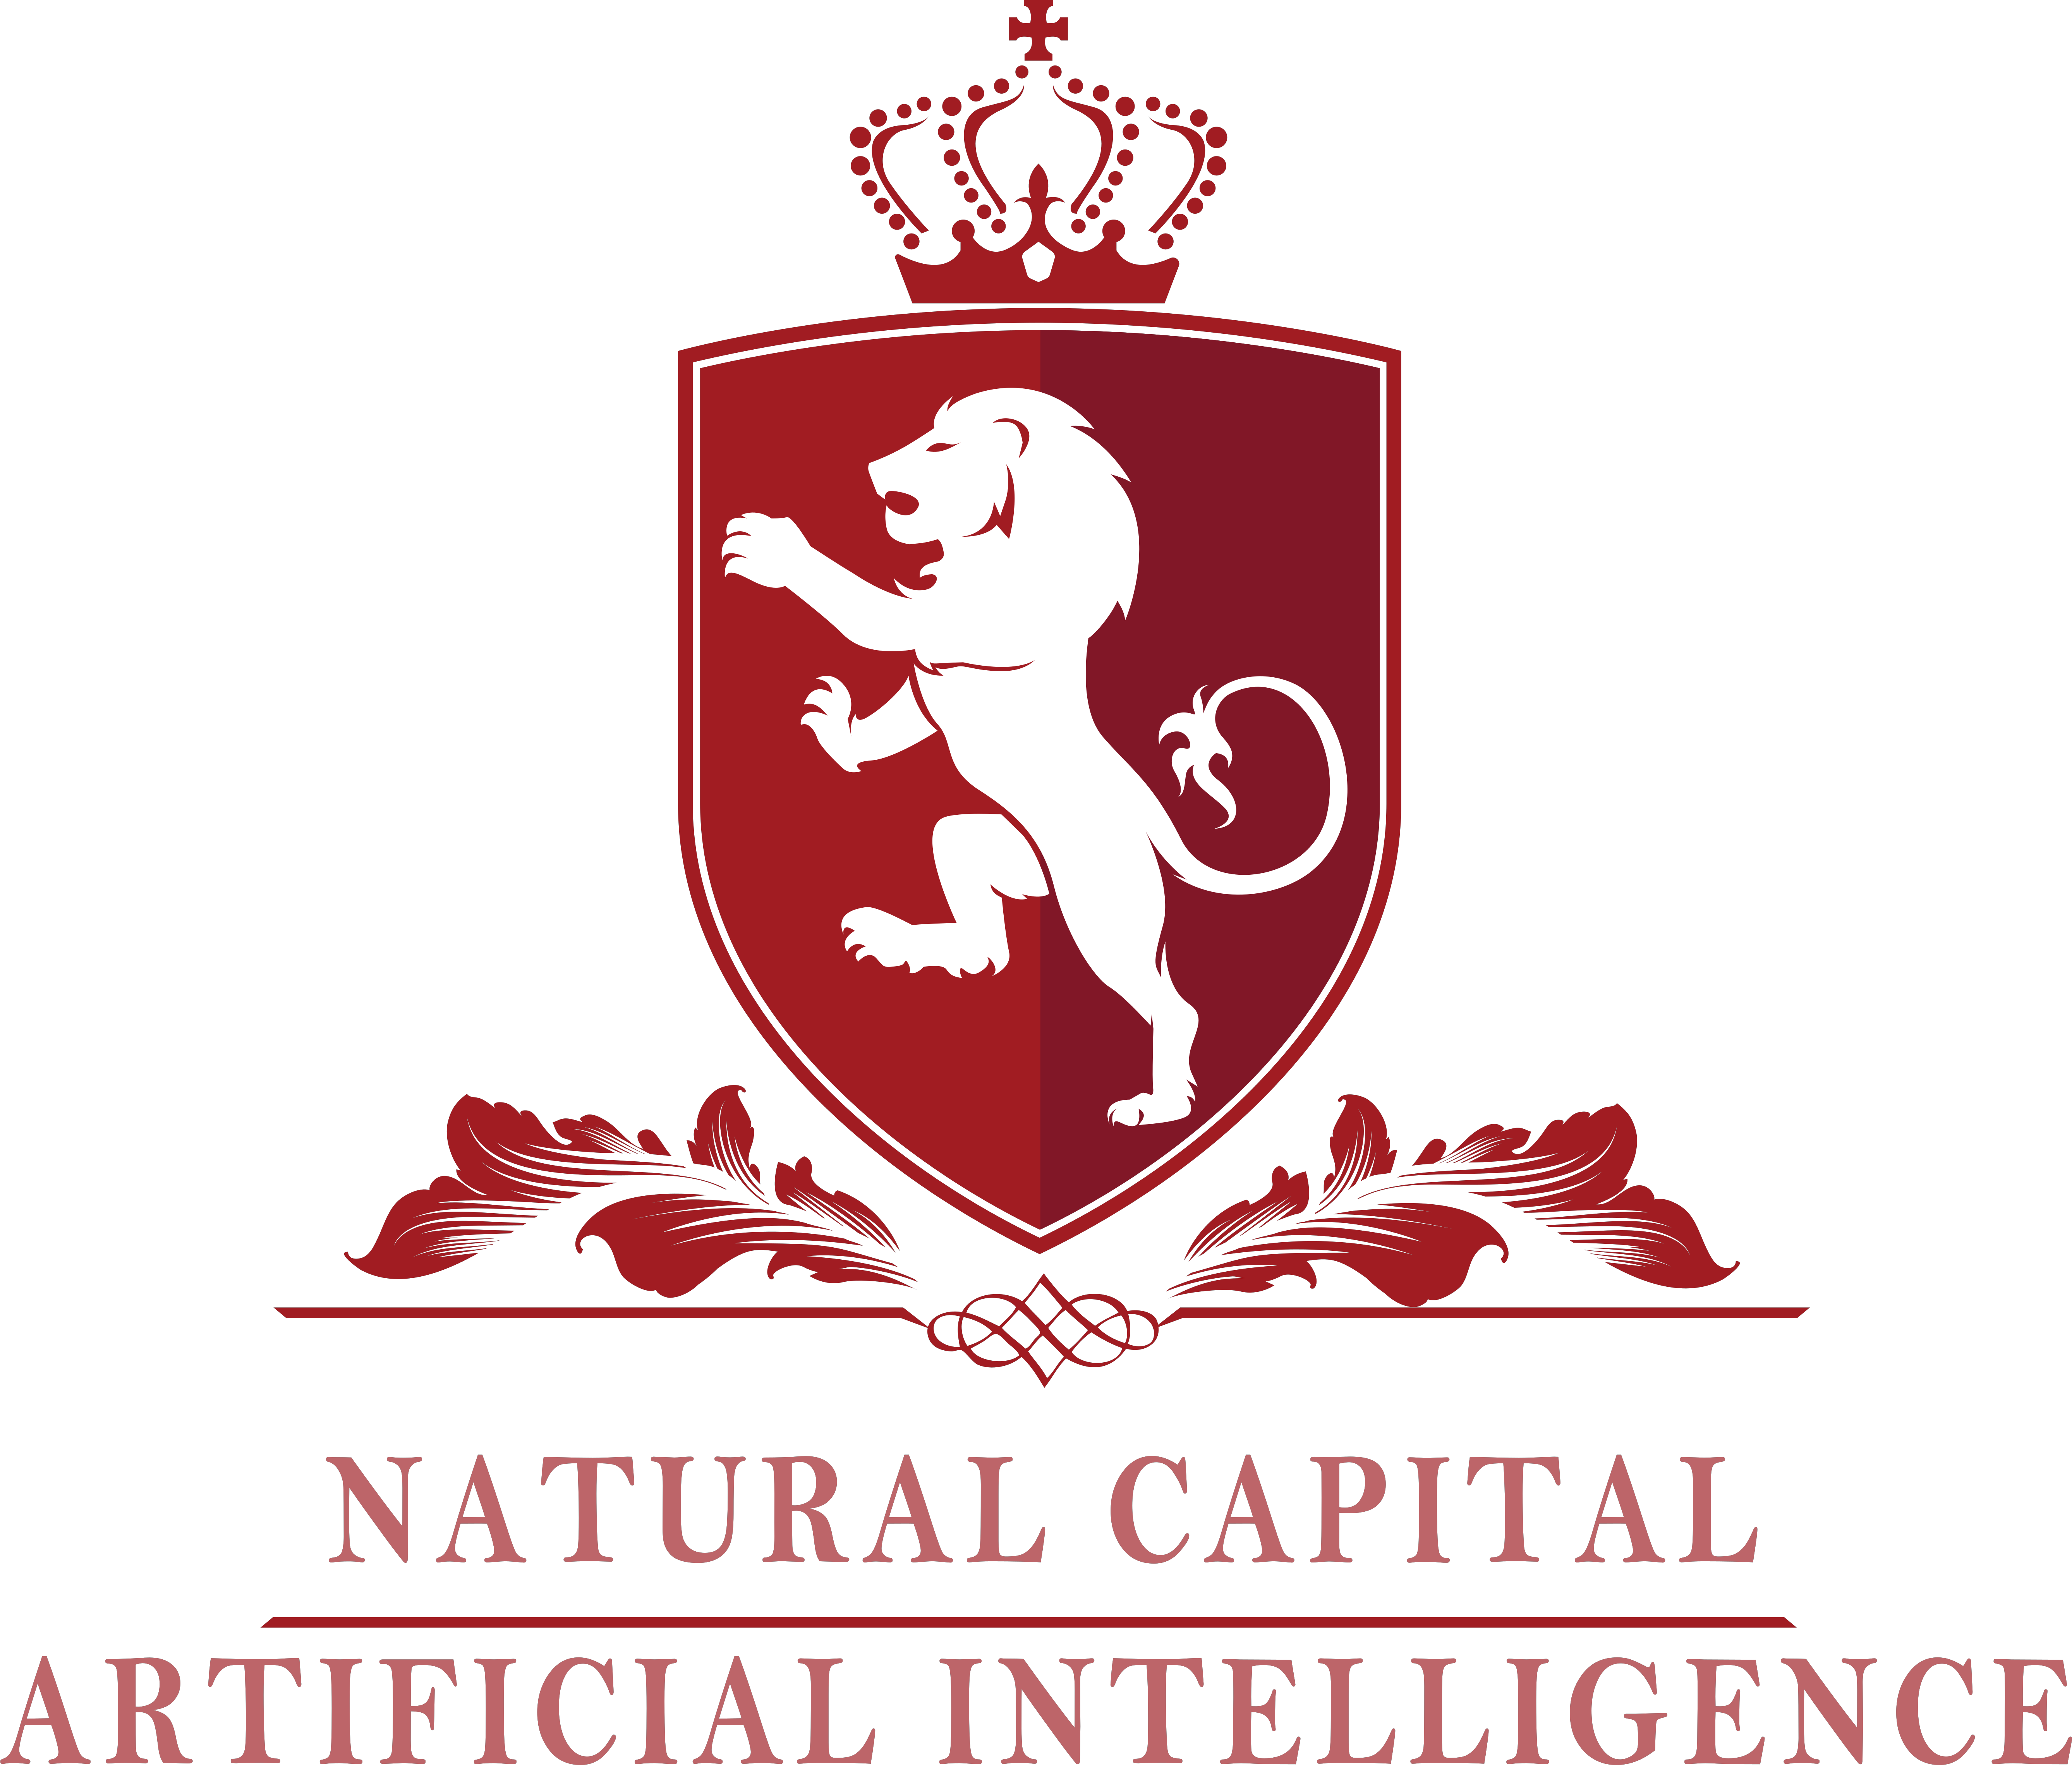 Natural Capital and Artificial Intelligence